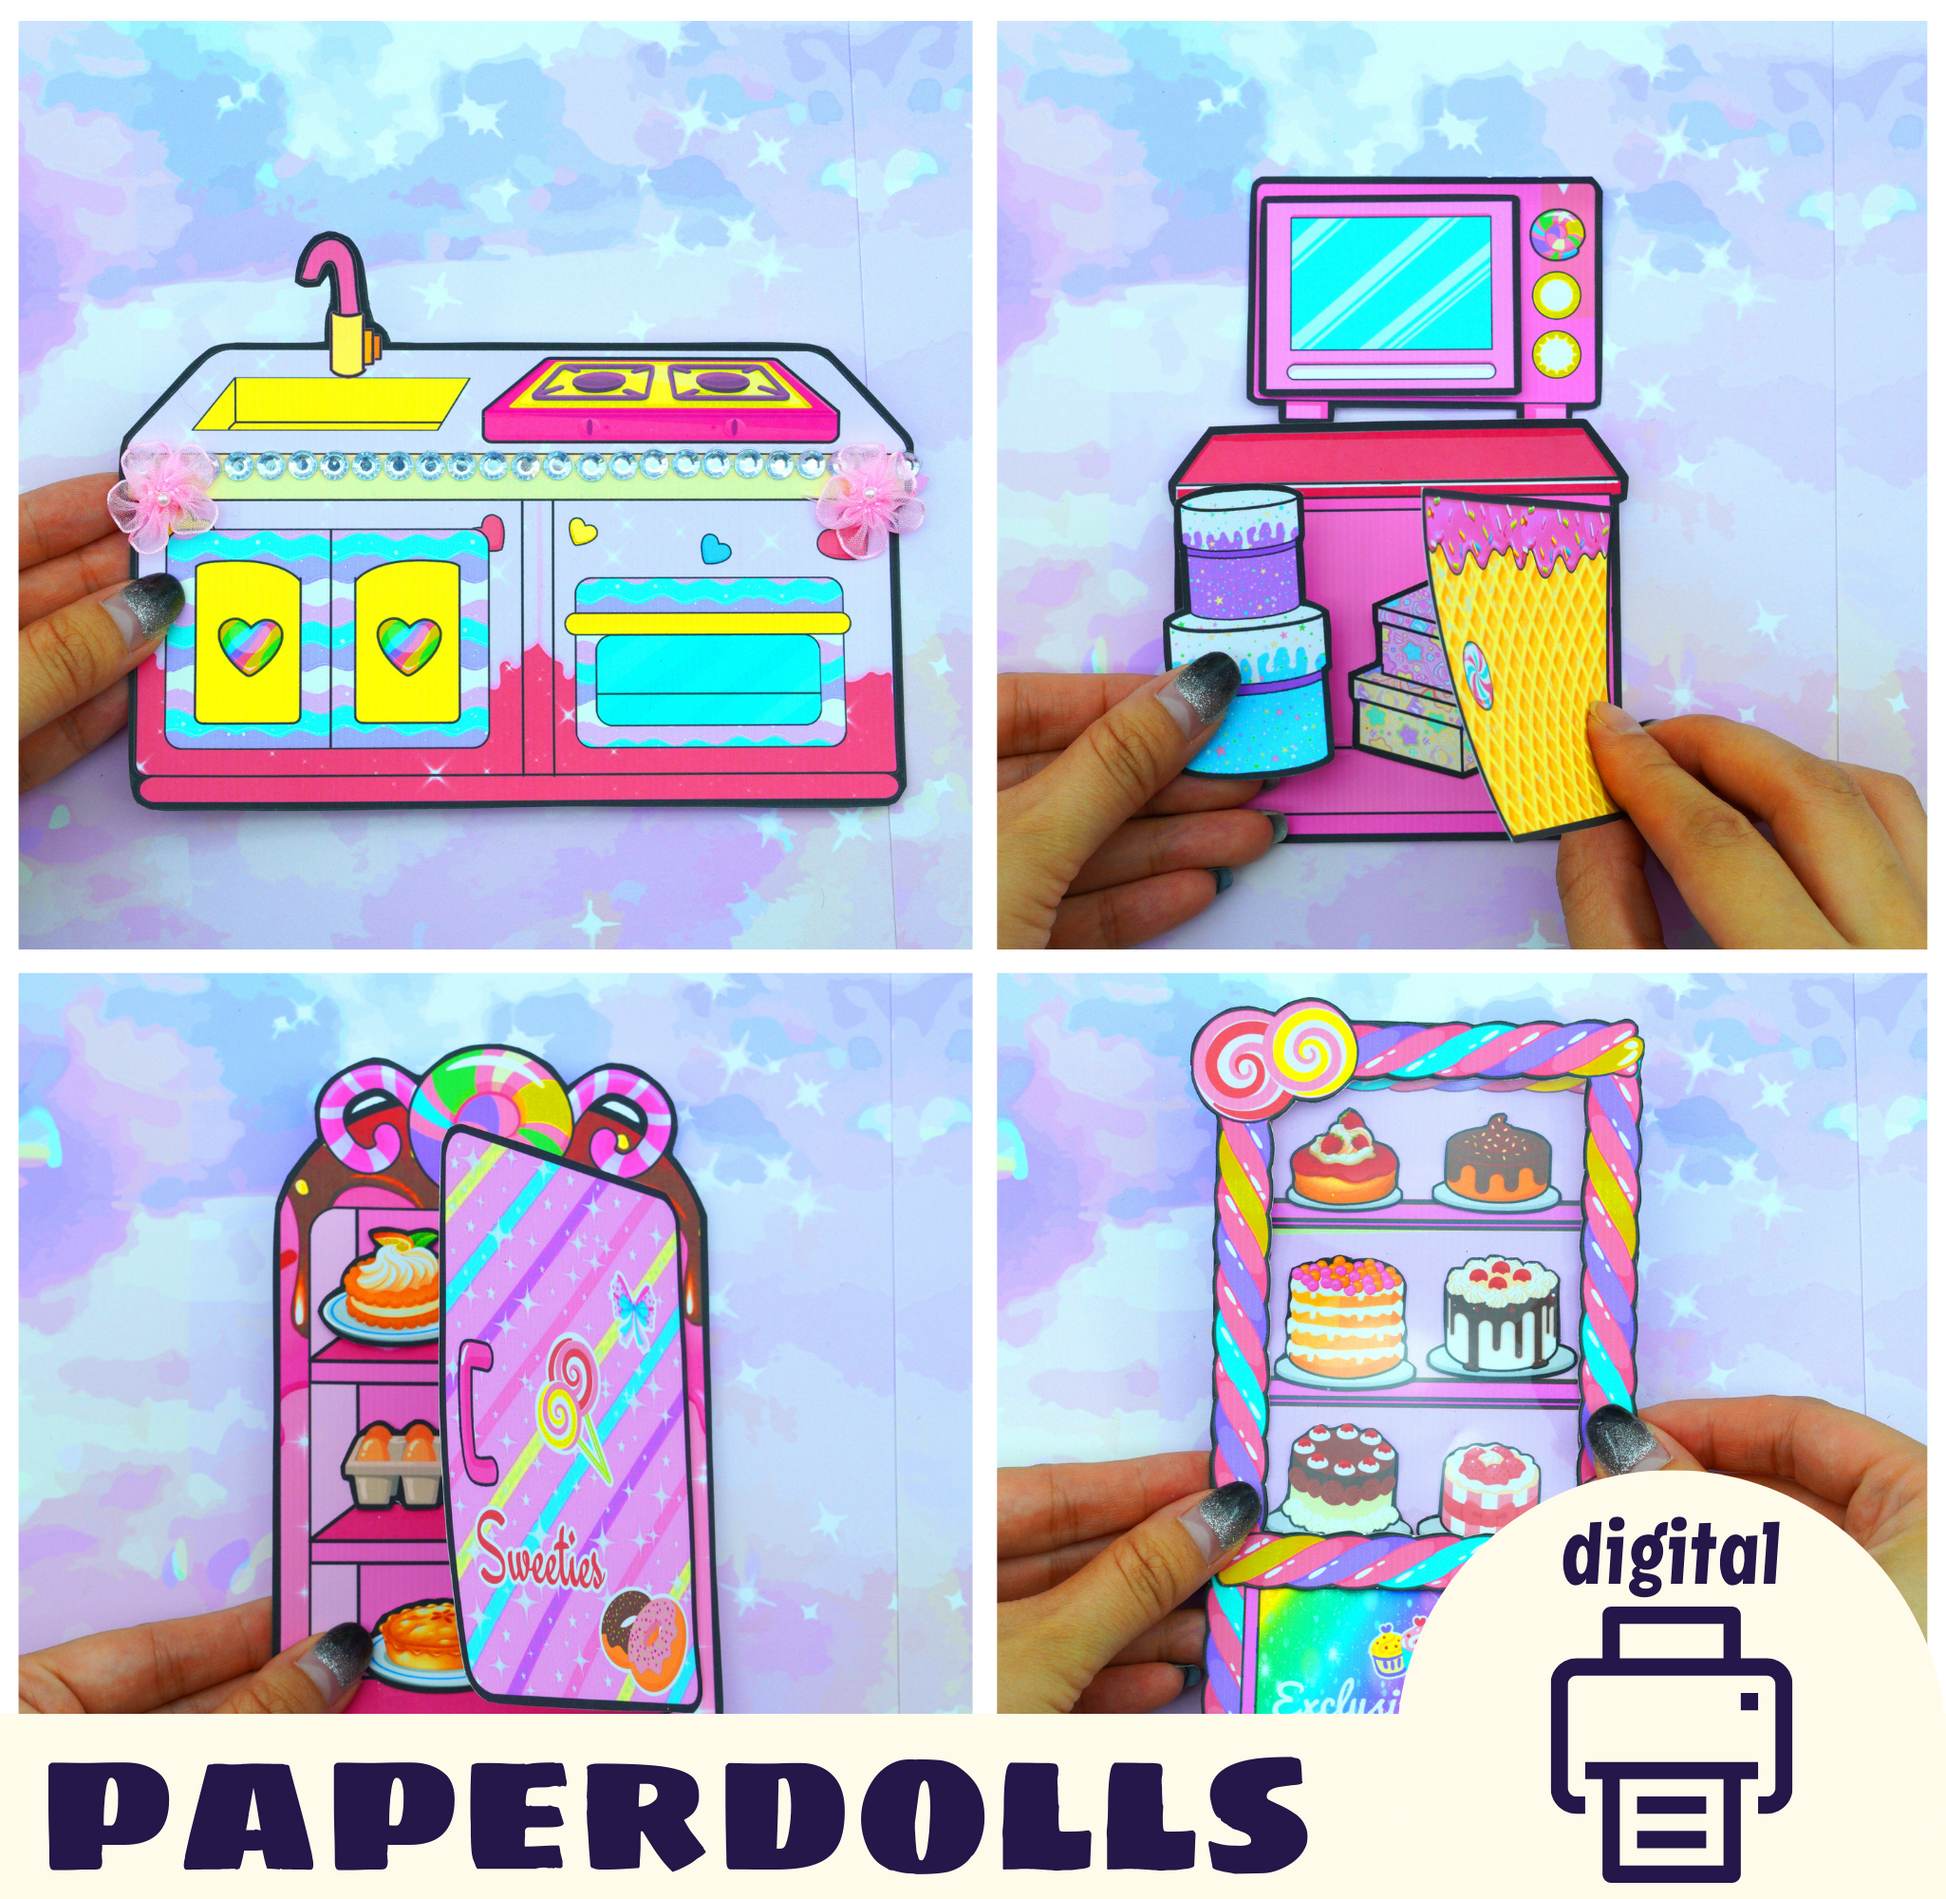 Happy Doll House Printable DIY project Dream Dollhouse with Paper Doll –  WOA DOLL CRAFT